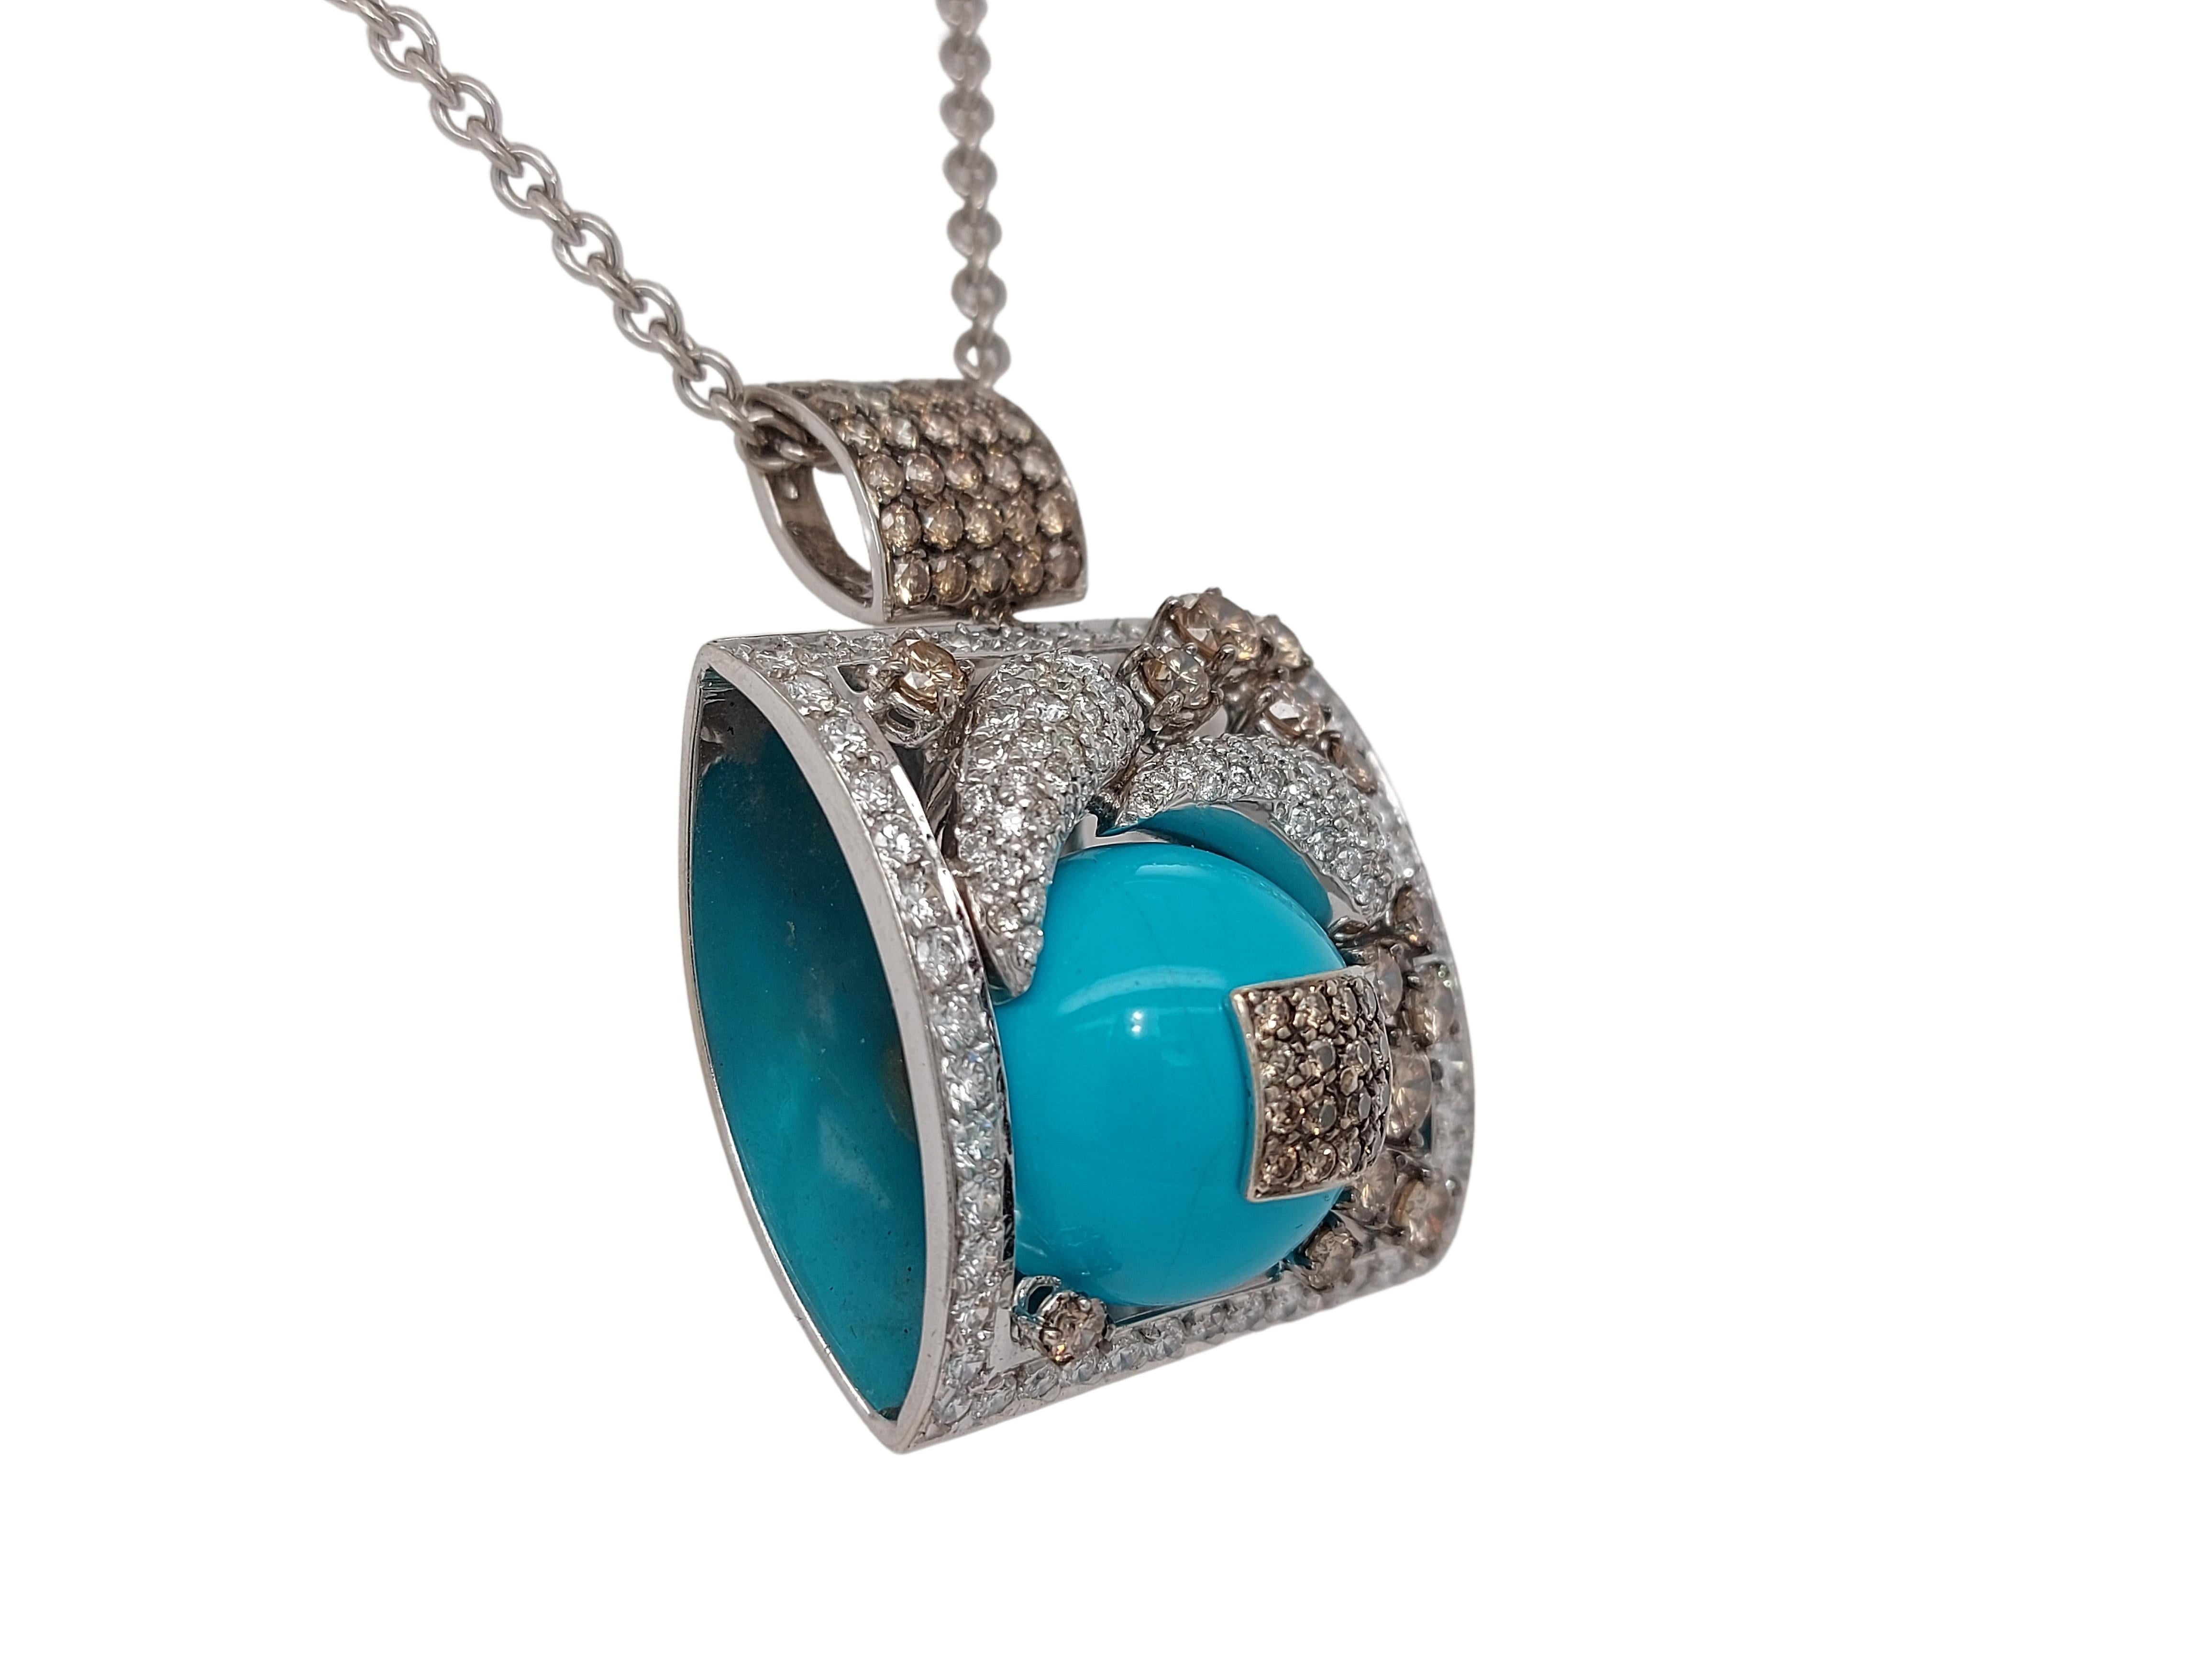 Stunning 18kt White Gold Pendant / Necklace with Turquoise and Diamonds 2